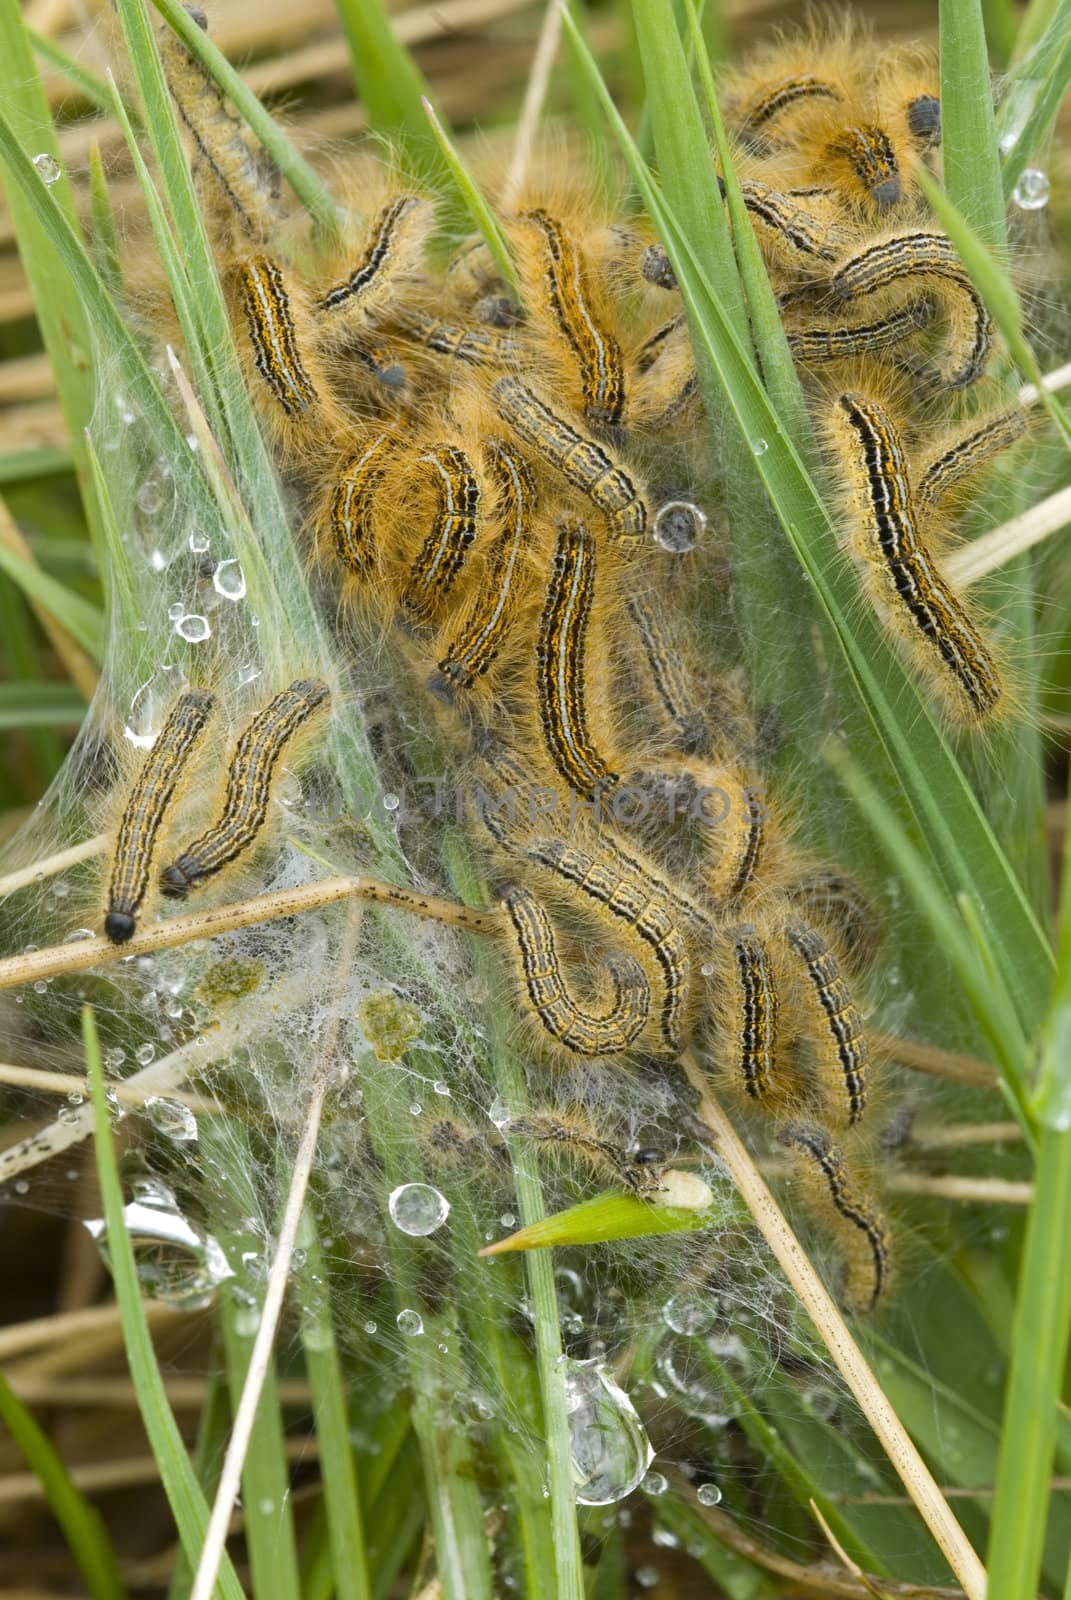  Colony nest of caterpillars among grass and dew drops